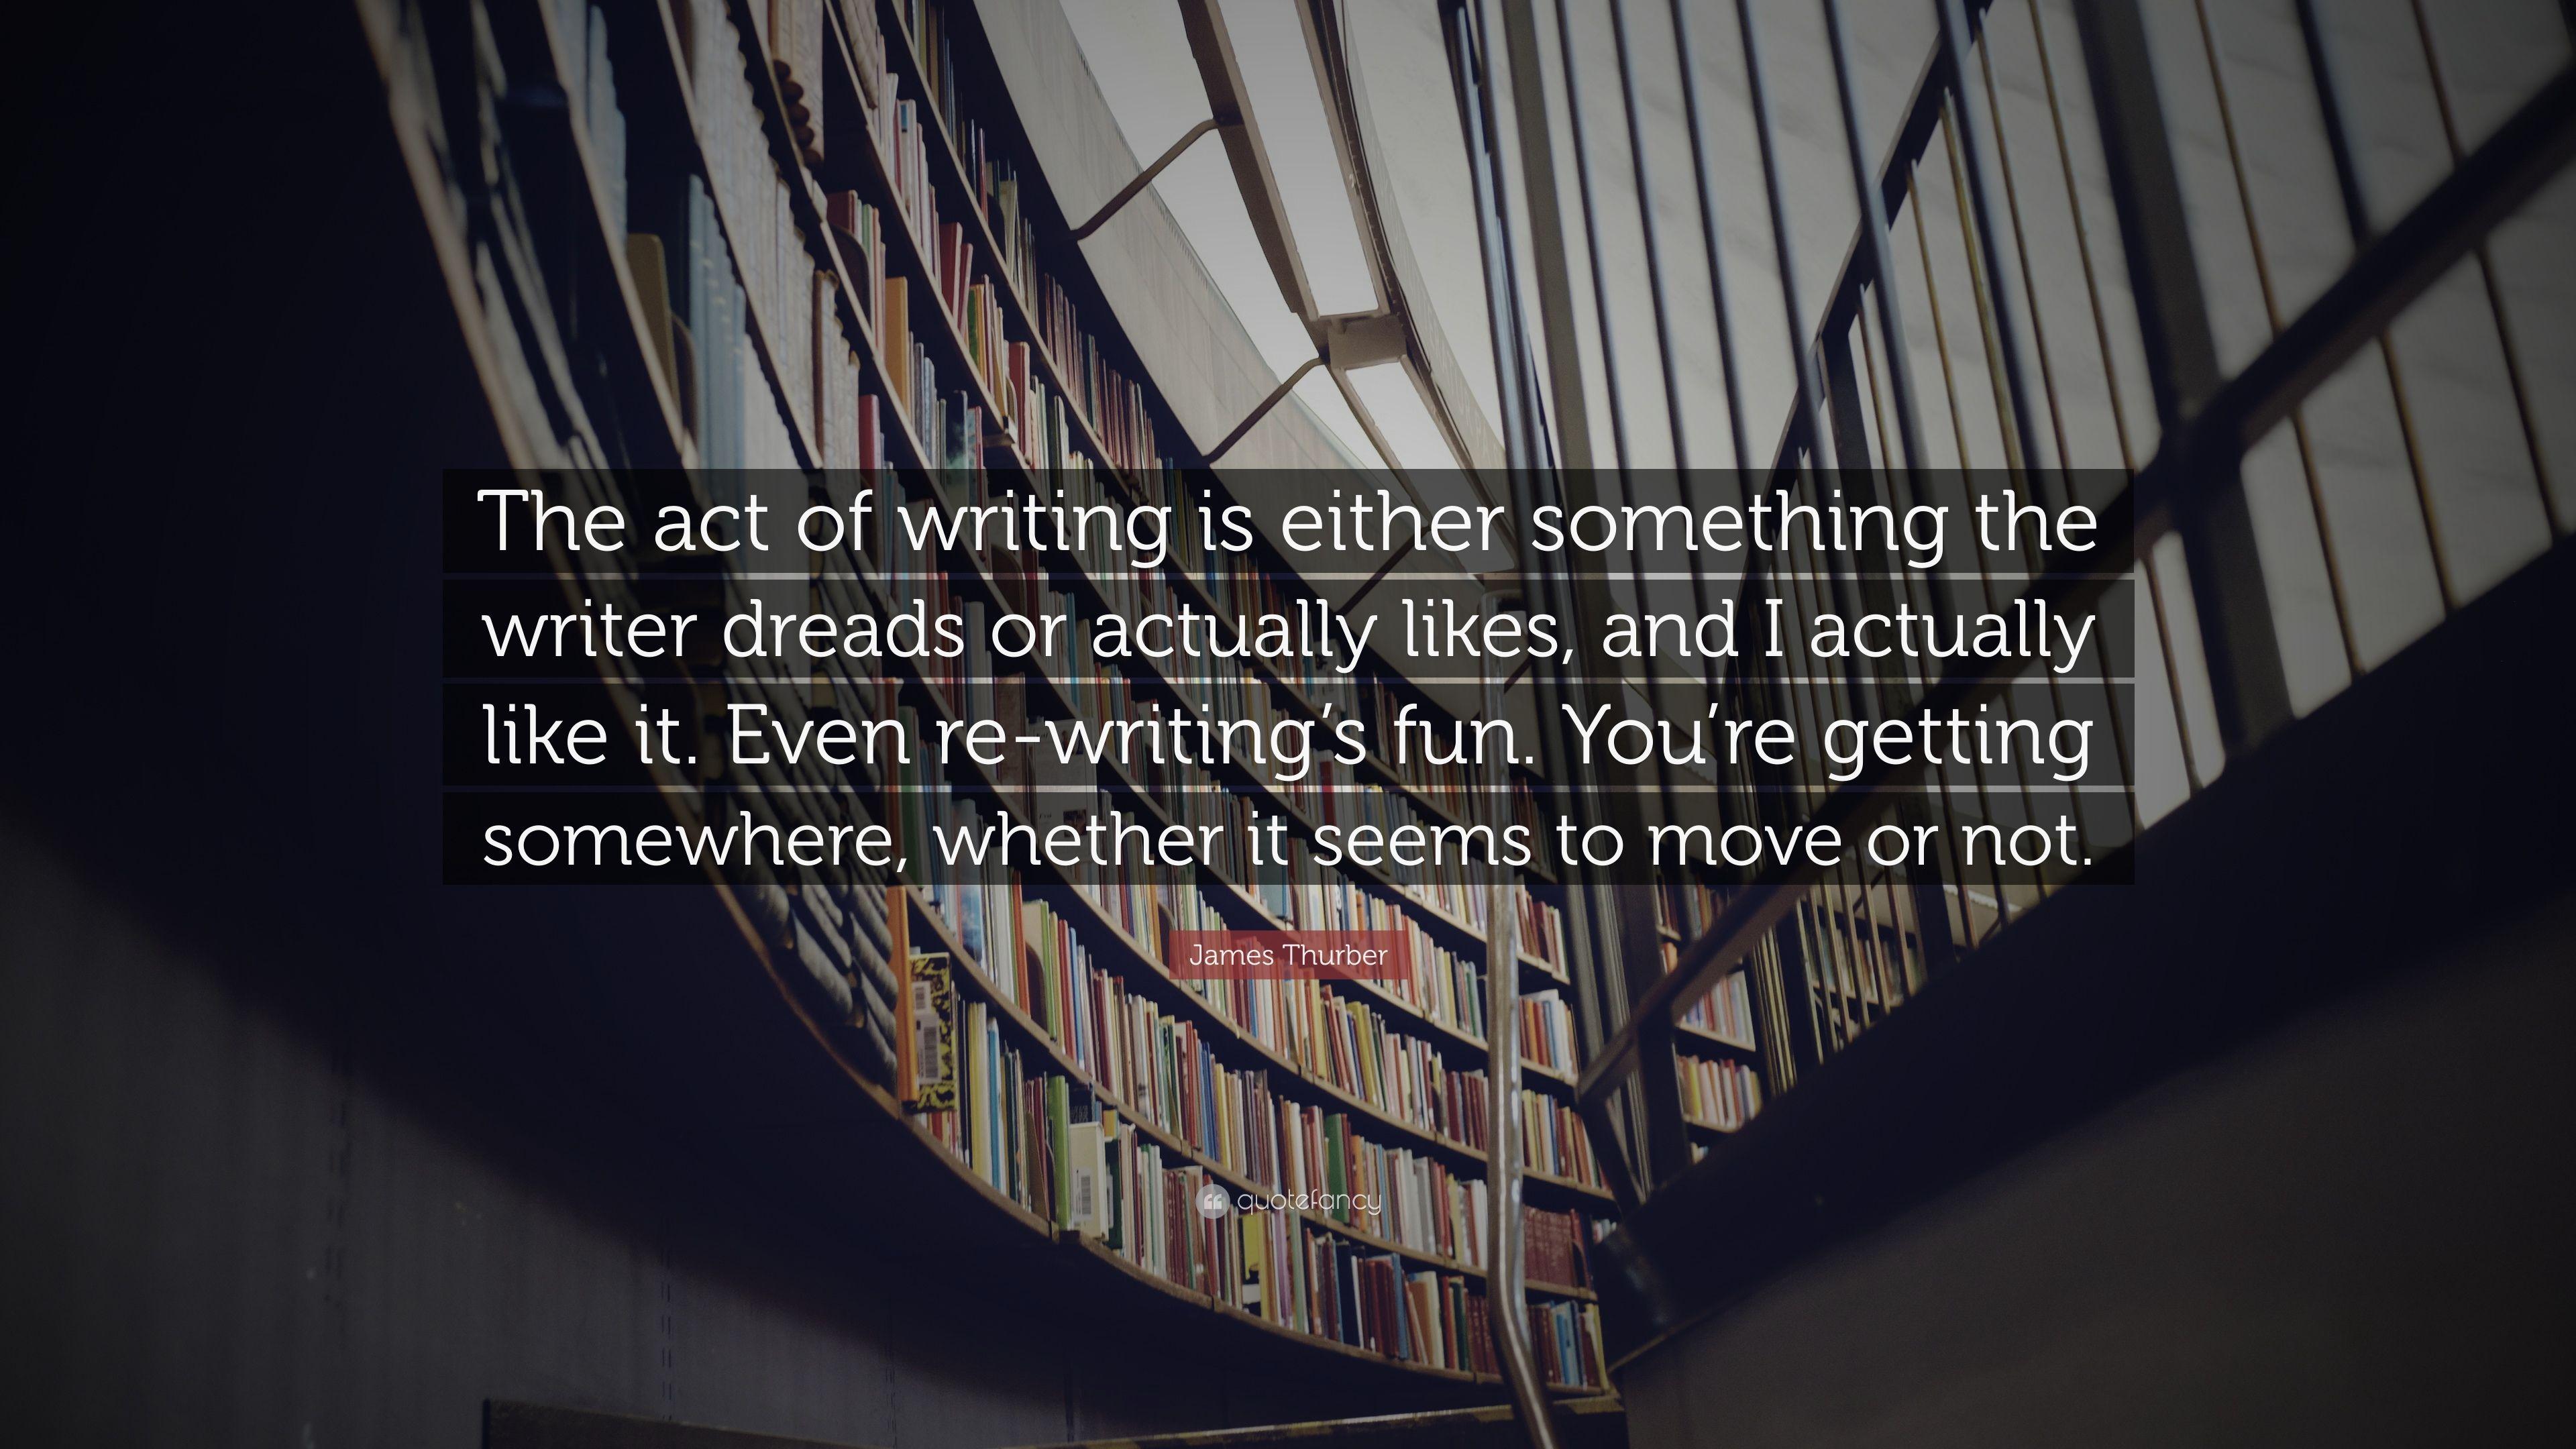 James Thurber Quote: “The act of writing is either something